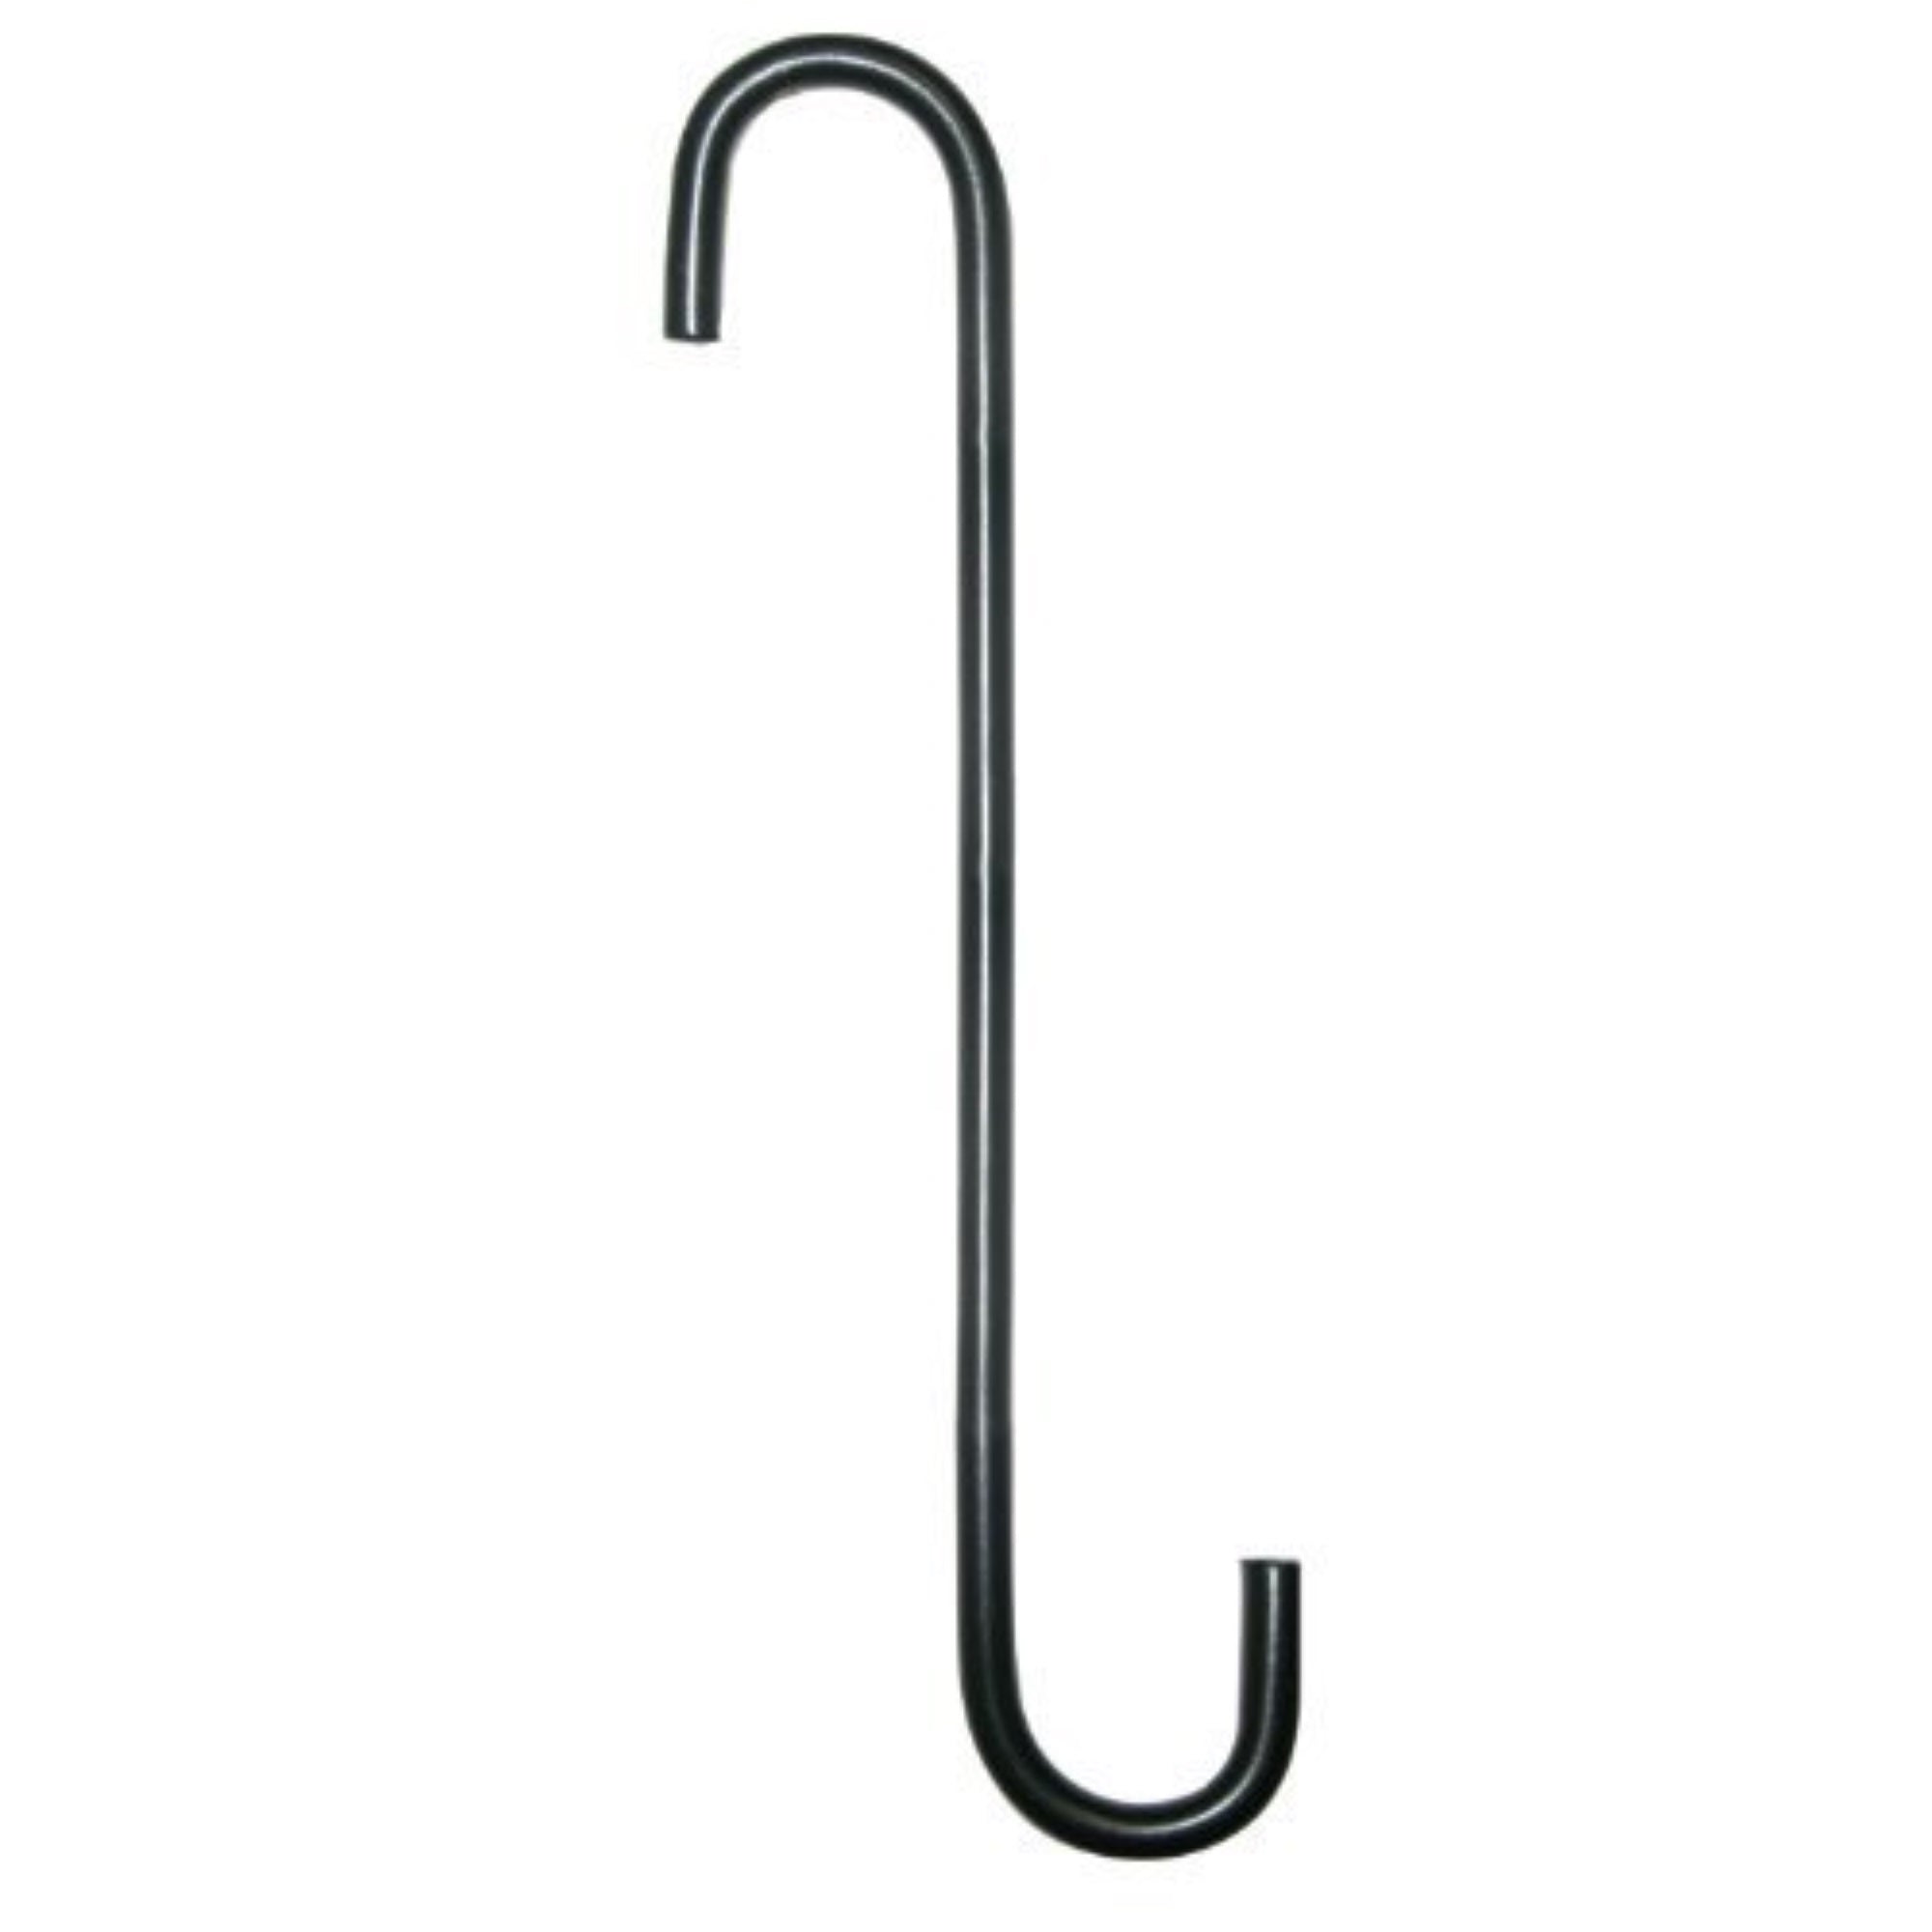 Hookery (#RS8) Metal S Extension Hook, Black 8” with 1” Opening (Pack of 1)